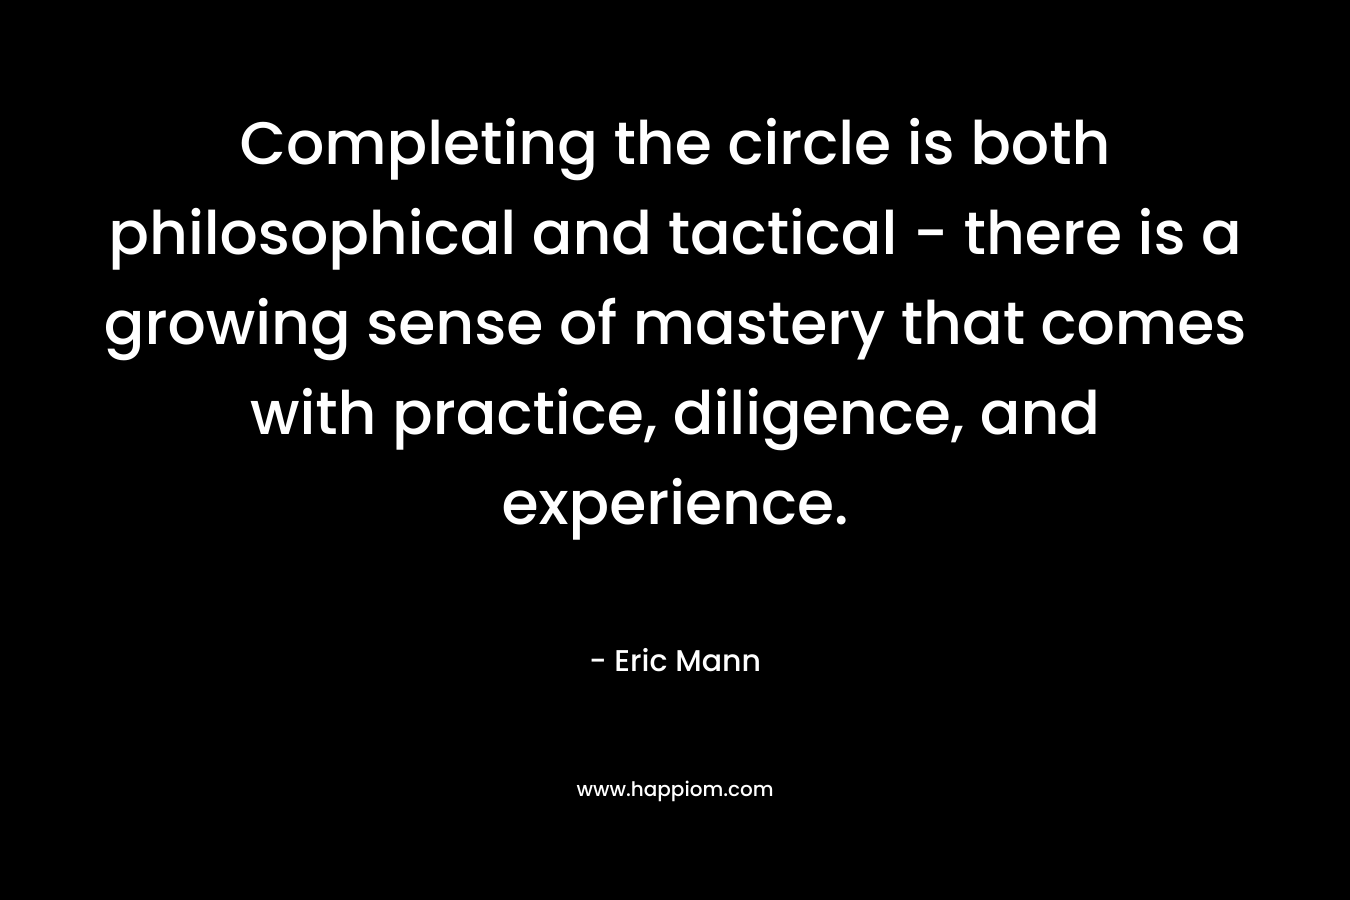 Completing the circle is both philosophical and tactical - there is a growing sense of mastery that comes with practice, diligence, and experience.